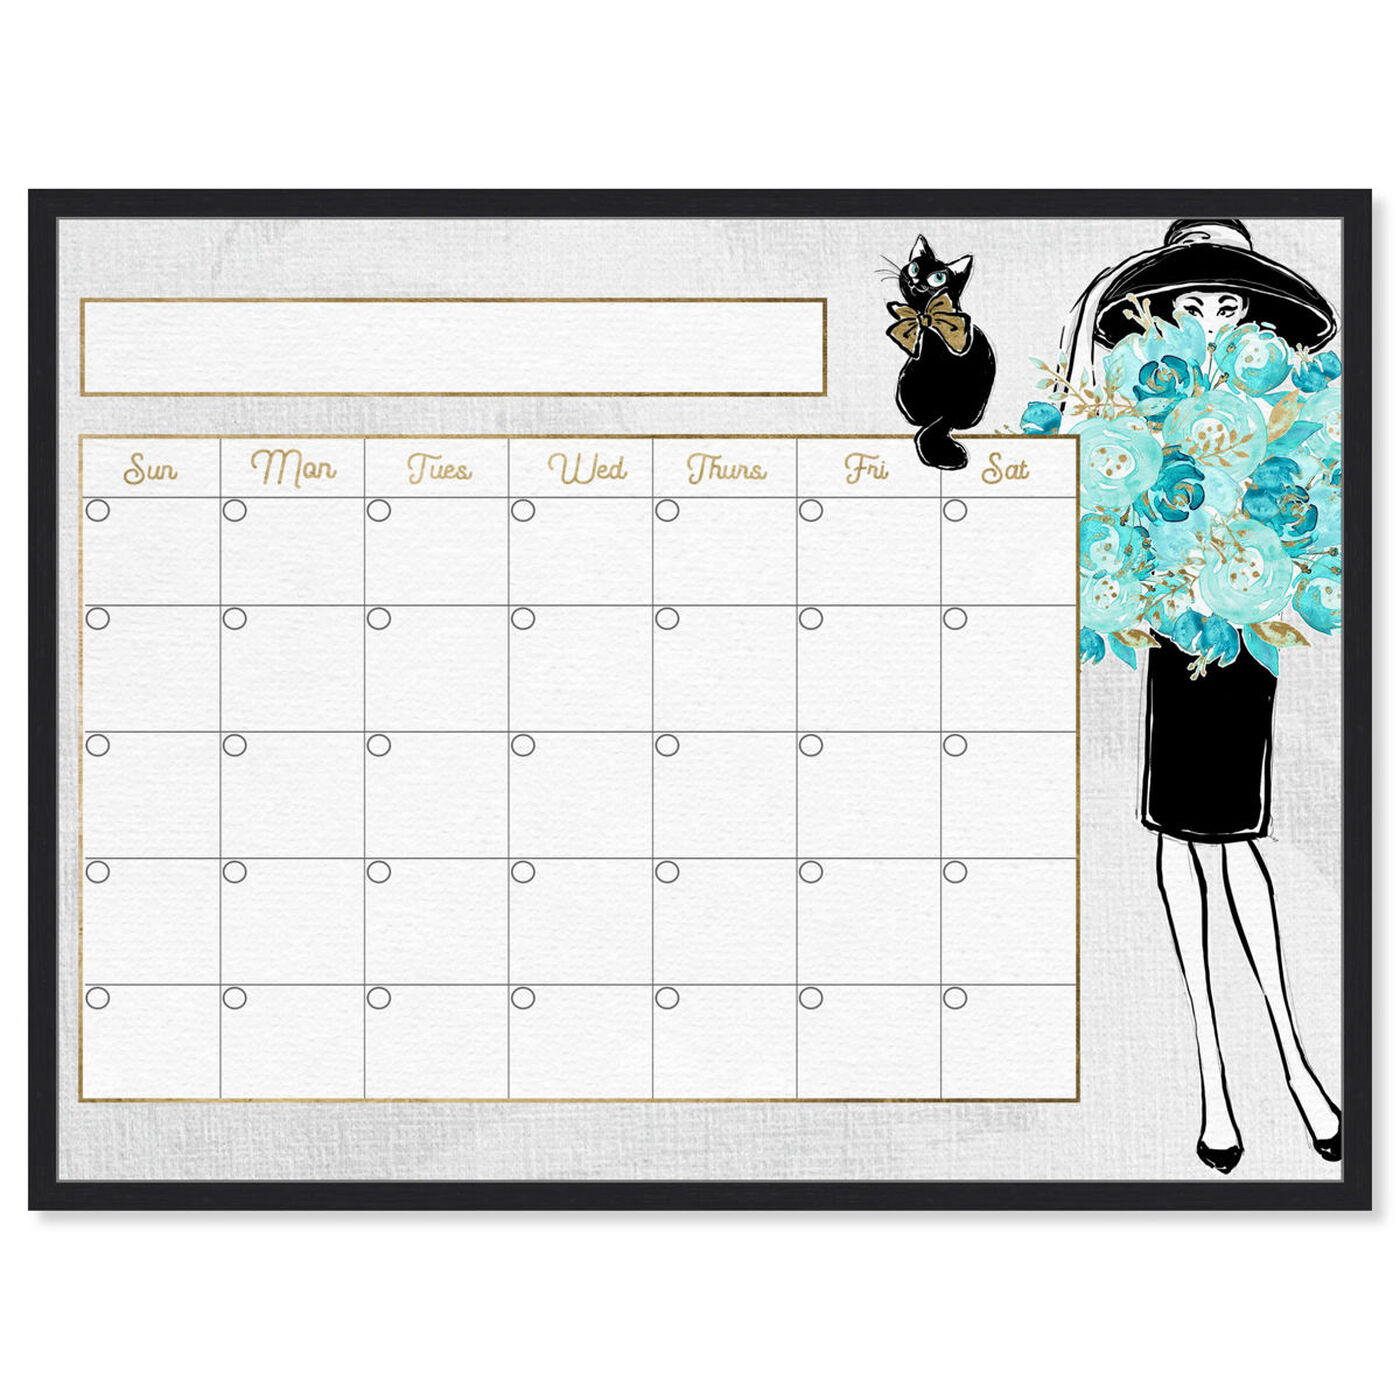 Flowers Cats and Pretty Girl Monthly Calendar